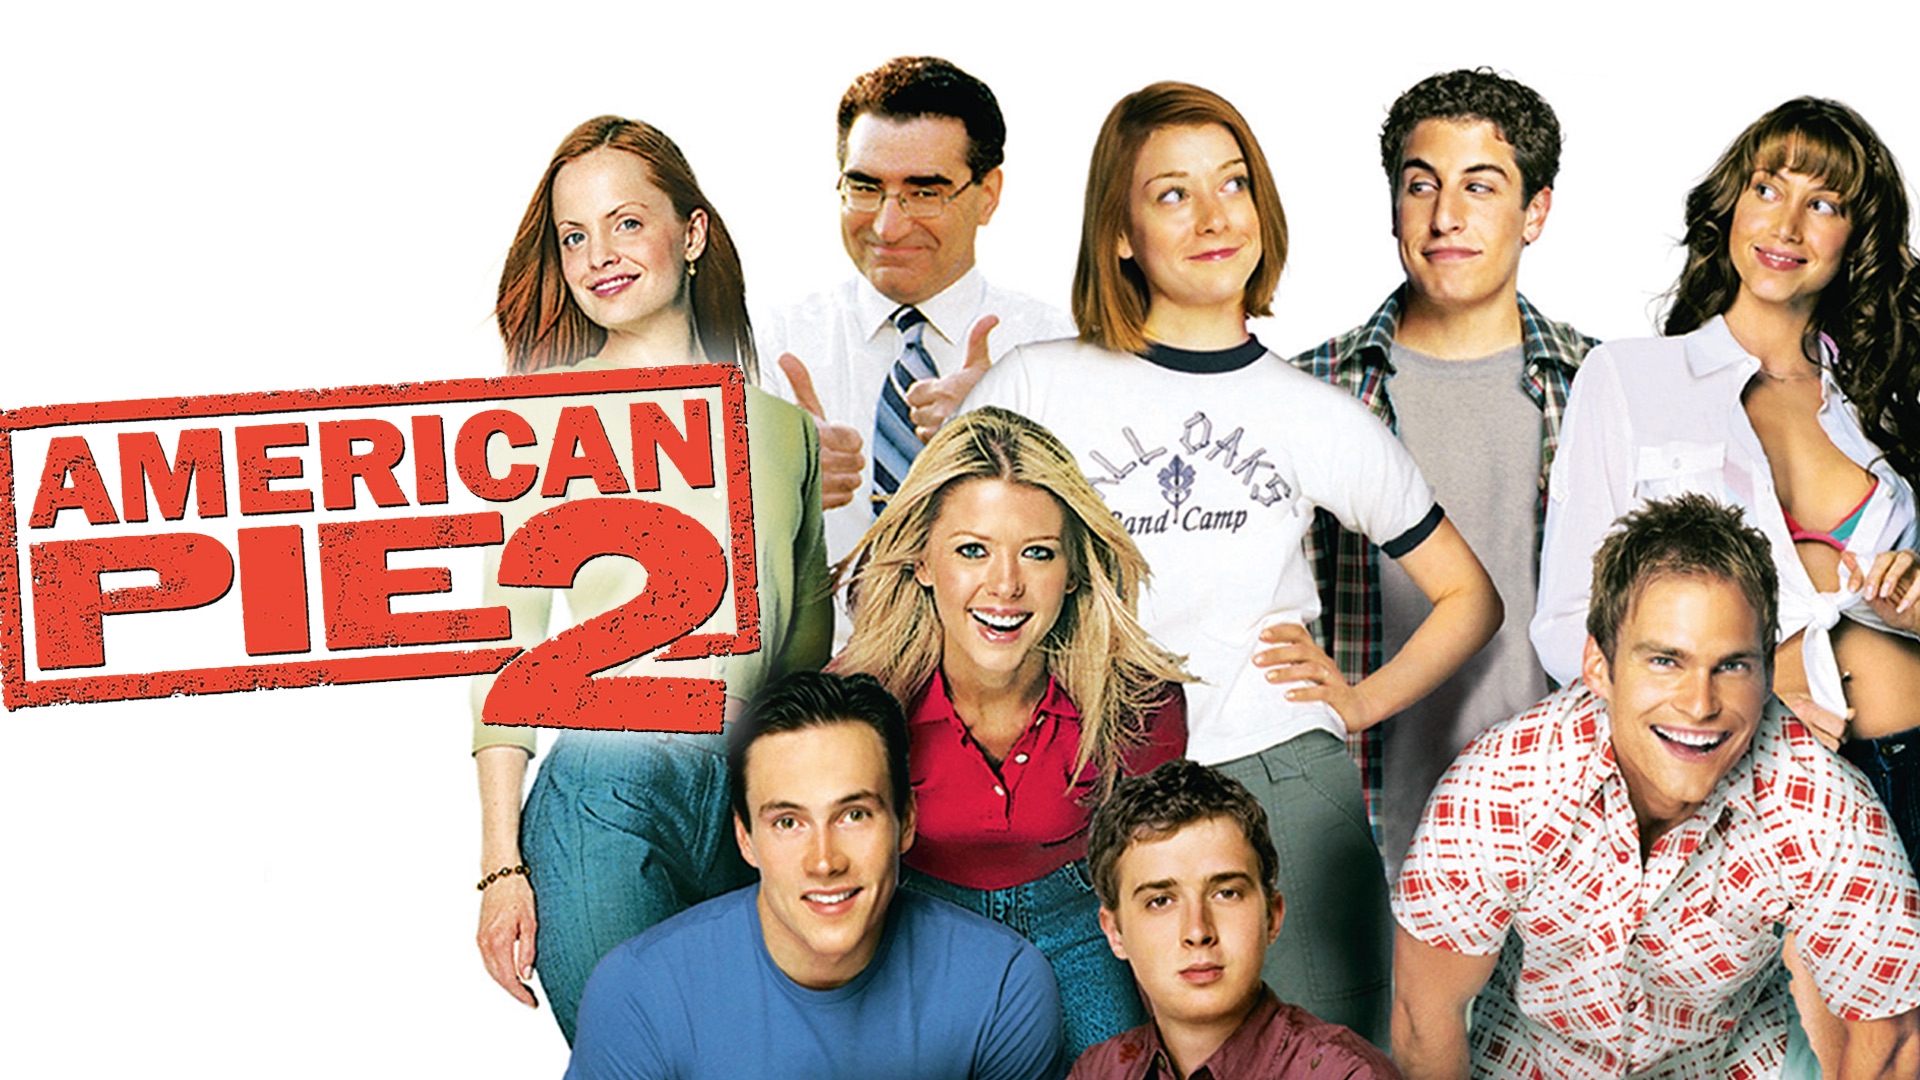 anggiat hutagalung recommends megashare american pie 2 pic